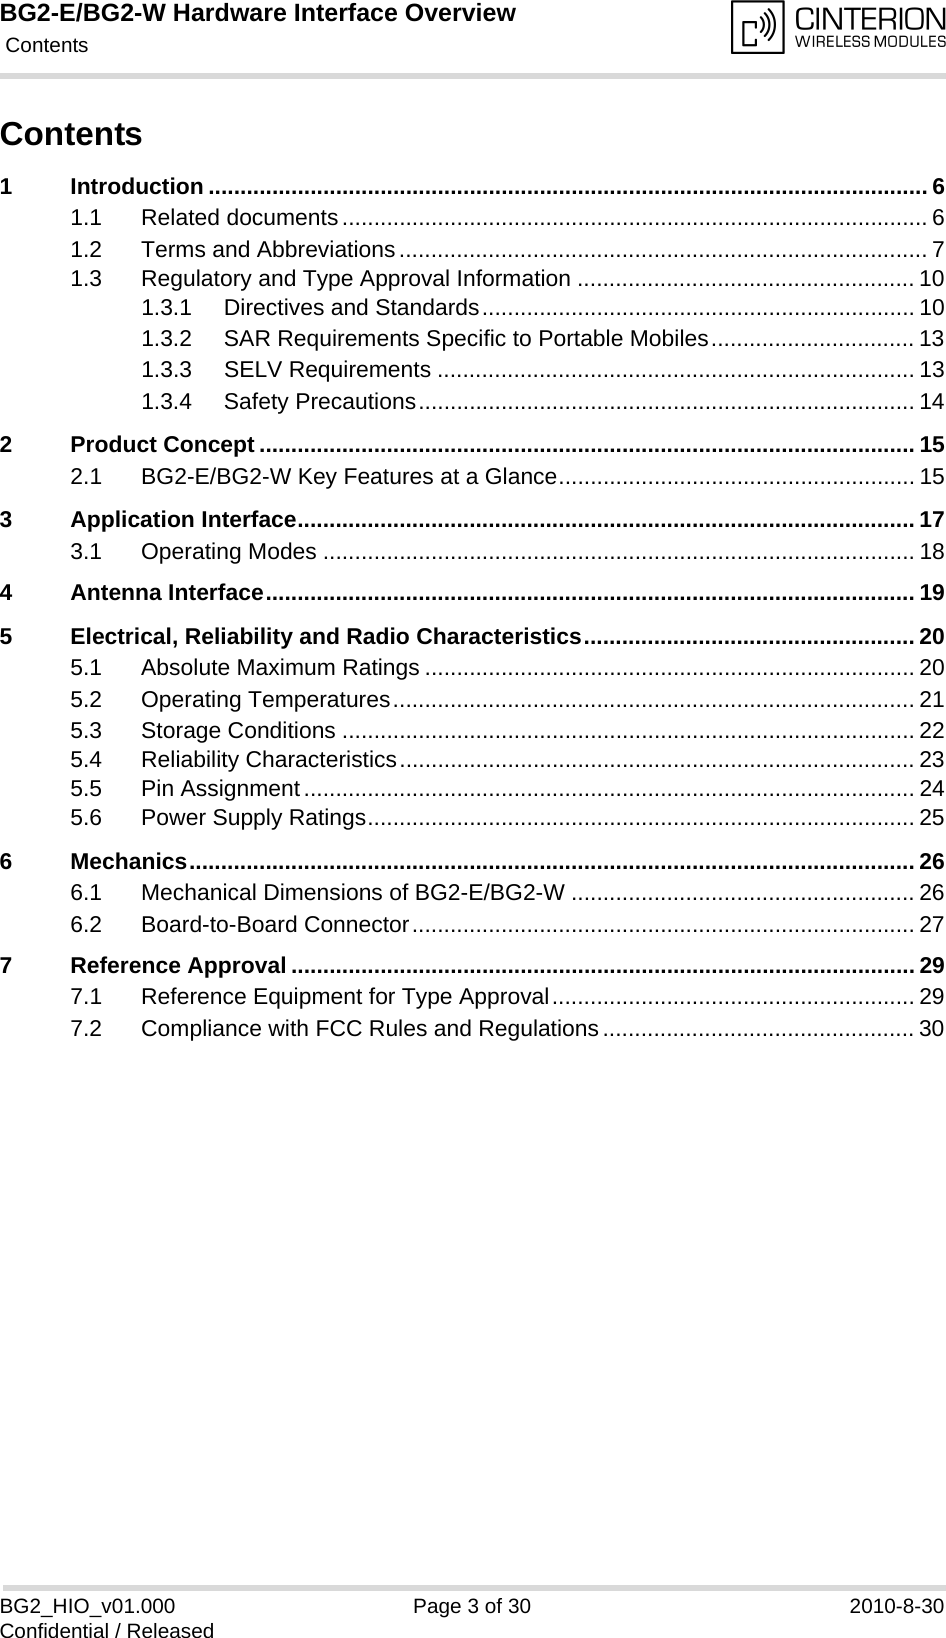 BG2-E/BG2-W Hardware Interface Overview Contents30BG2_HIO_v01.000 Page 3 of 30 2010-8-30Confidential / ReleasedContents1 Introduction ................................................................................................................. 61.1 Related documents............................................................................................ 61.2 Terms and Abbreviations................................................................................... 71.3 Regulatory and Type Approval Information ..................................................... 101.3.1 Directives and Standards.................................................................... 101.3.2 SAR Requirements Specific to Portable Mobiles................................ 131.3.3 SELV Requirements ........................................................................... 131.3.4 Safety Precautions.............................................................................. 142 Product Concept ....................................................................................................... 152.1 BG2-E/BG2-W Key Features at a Glance........................................................ 153 Application Interface................................................................................................. 173.1 Operating Modes ............................................................................................. 184 Antenna Interface...................................................................................................... 195 Electrical, Reliability and Radio Characteristics.................................................... 205.1 Absolute Maximum Ratings ............................................................................. 205.2 Operating Temperatures.................................................................................. 215.3 Storage Conditions .......................................................................................... 225.4 Reliability Characteristics................................................................................. 235.5 Pin Assignment................................................................................................ 245.6 Power Supply Ratings...................................................................................... 256 Mechanics.................................................................................................................. 266.1 Mechanical Dimensions of BG2-E/BG2-W ...................................................... 266.2 Board-to-Board Connector............................................................................... 277 Reference Approval .................................................................................................. 297.1 Reference Equipment for Type Approval......................................................... 297.2 Compliance with FCC Rules and Regulations................................................. 30